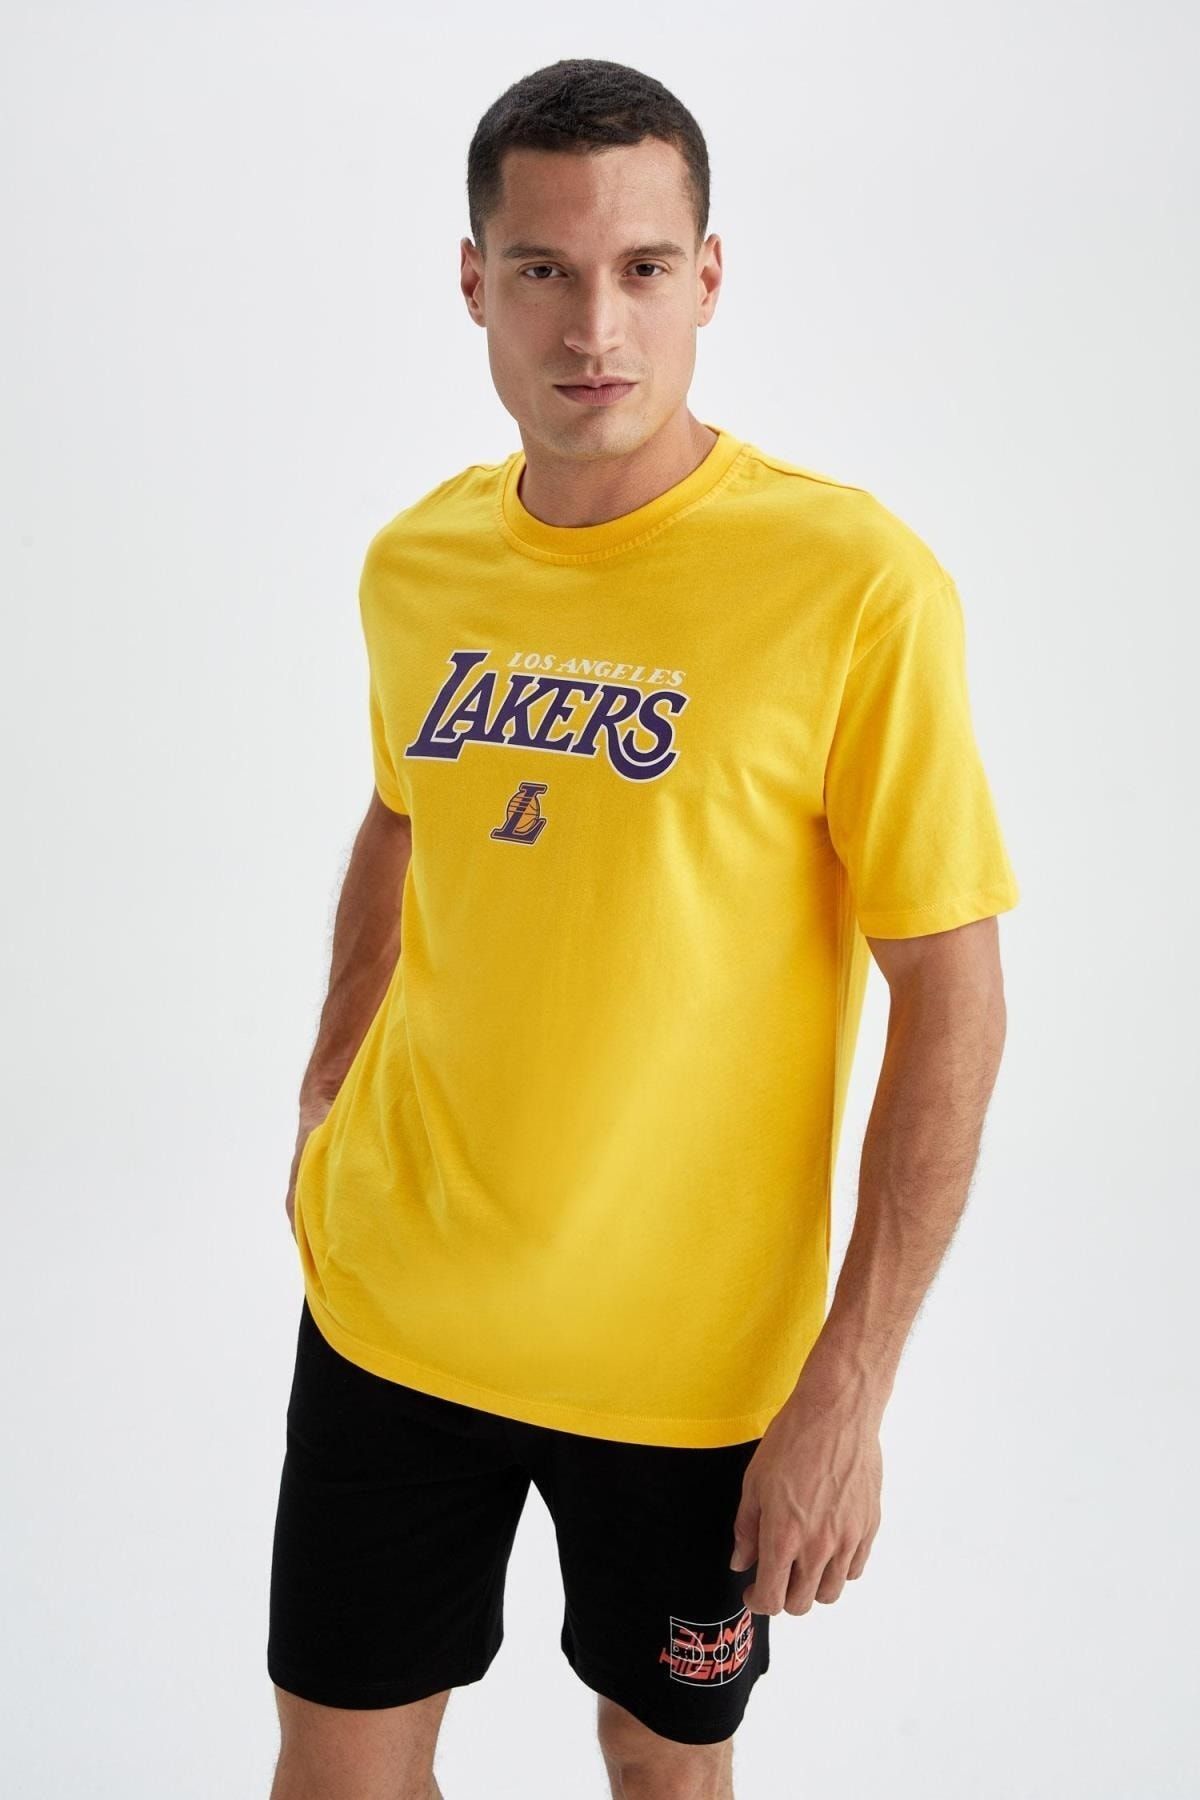 Grey WOMAN Defacto Fit NBA Los Angeles Lakers Licensed Standard Fit Athlete  Short Sleeve T-Shirt 2796620